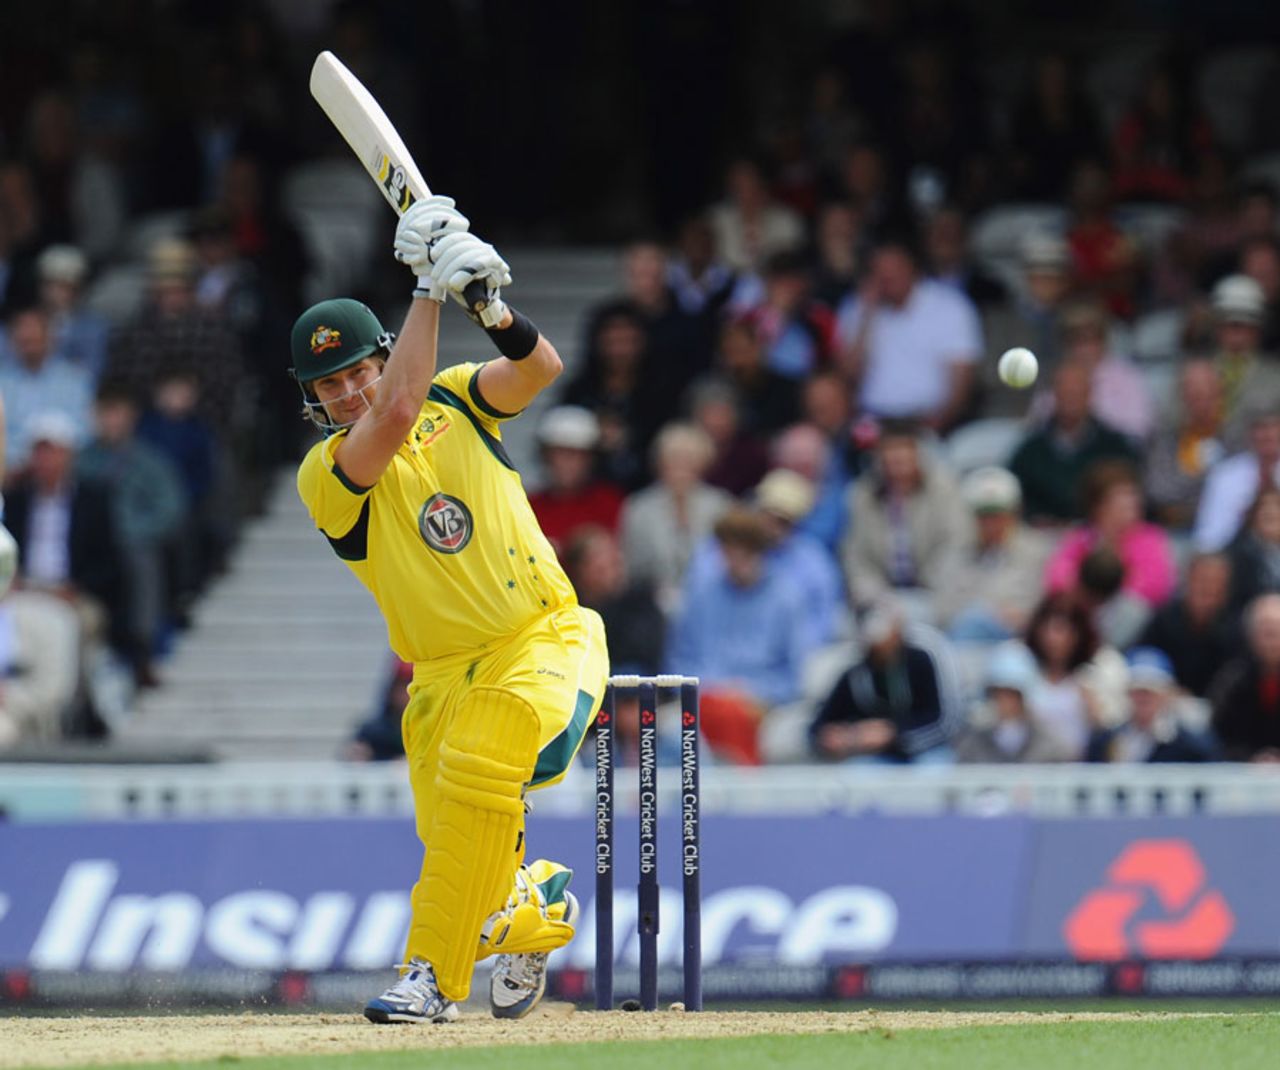 Shane Watson clubs a boundary to bring up his fifty, England v Australia, 2nd ODI, The Oval, July 1, 2012